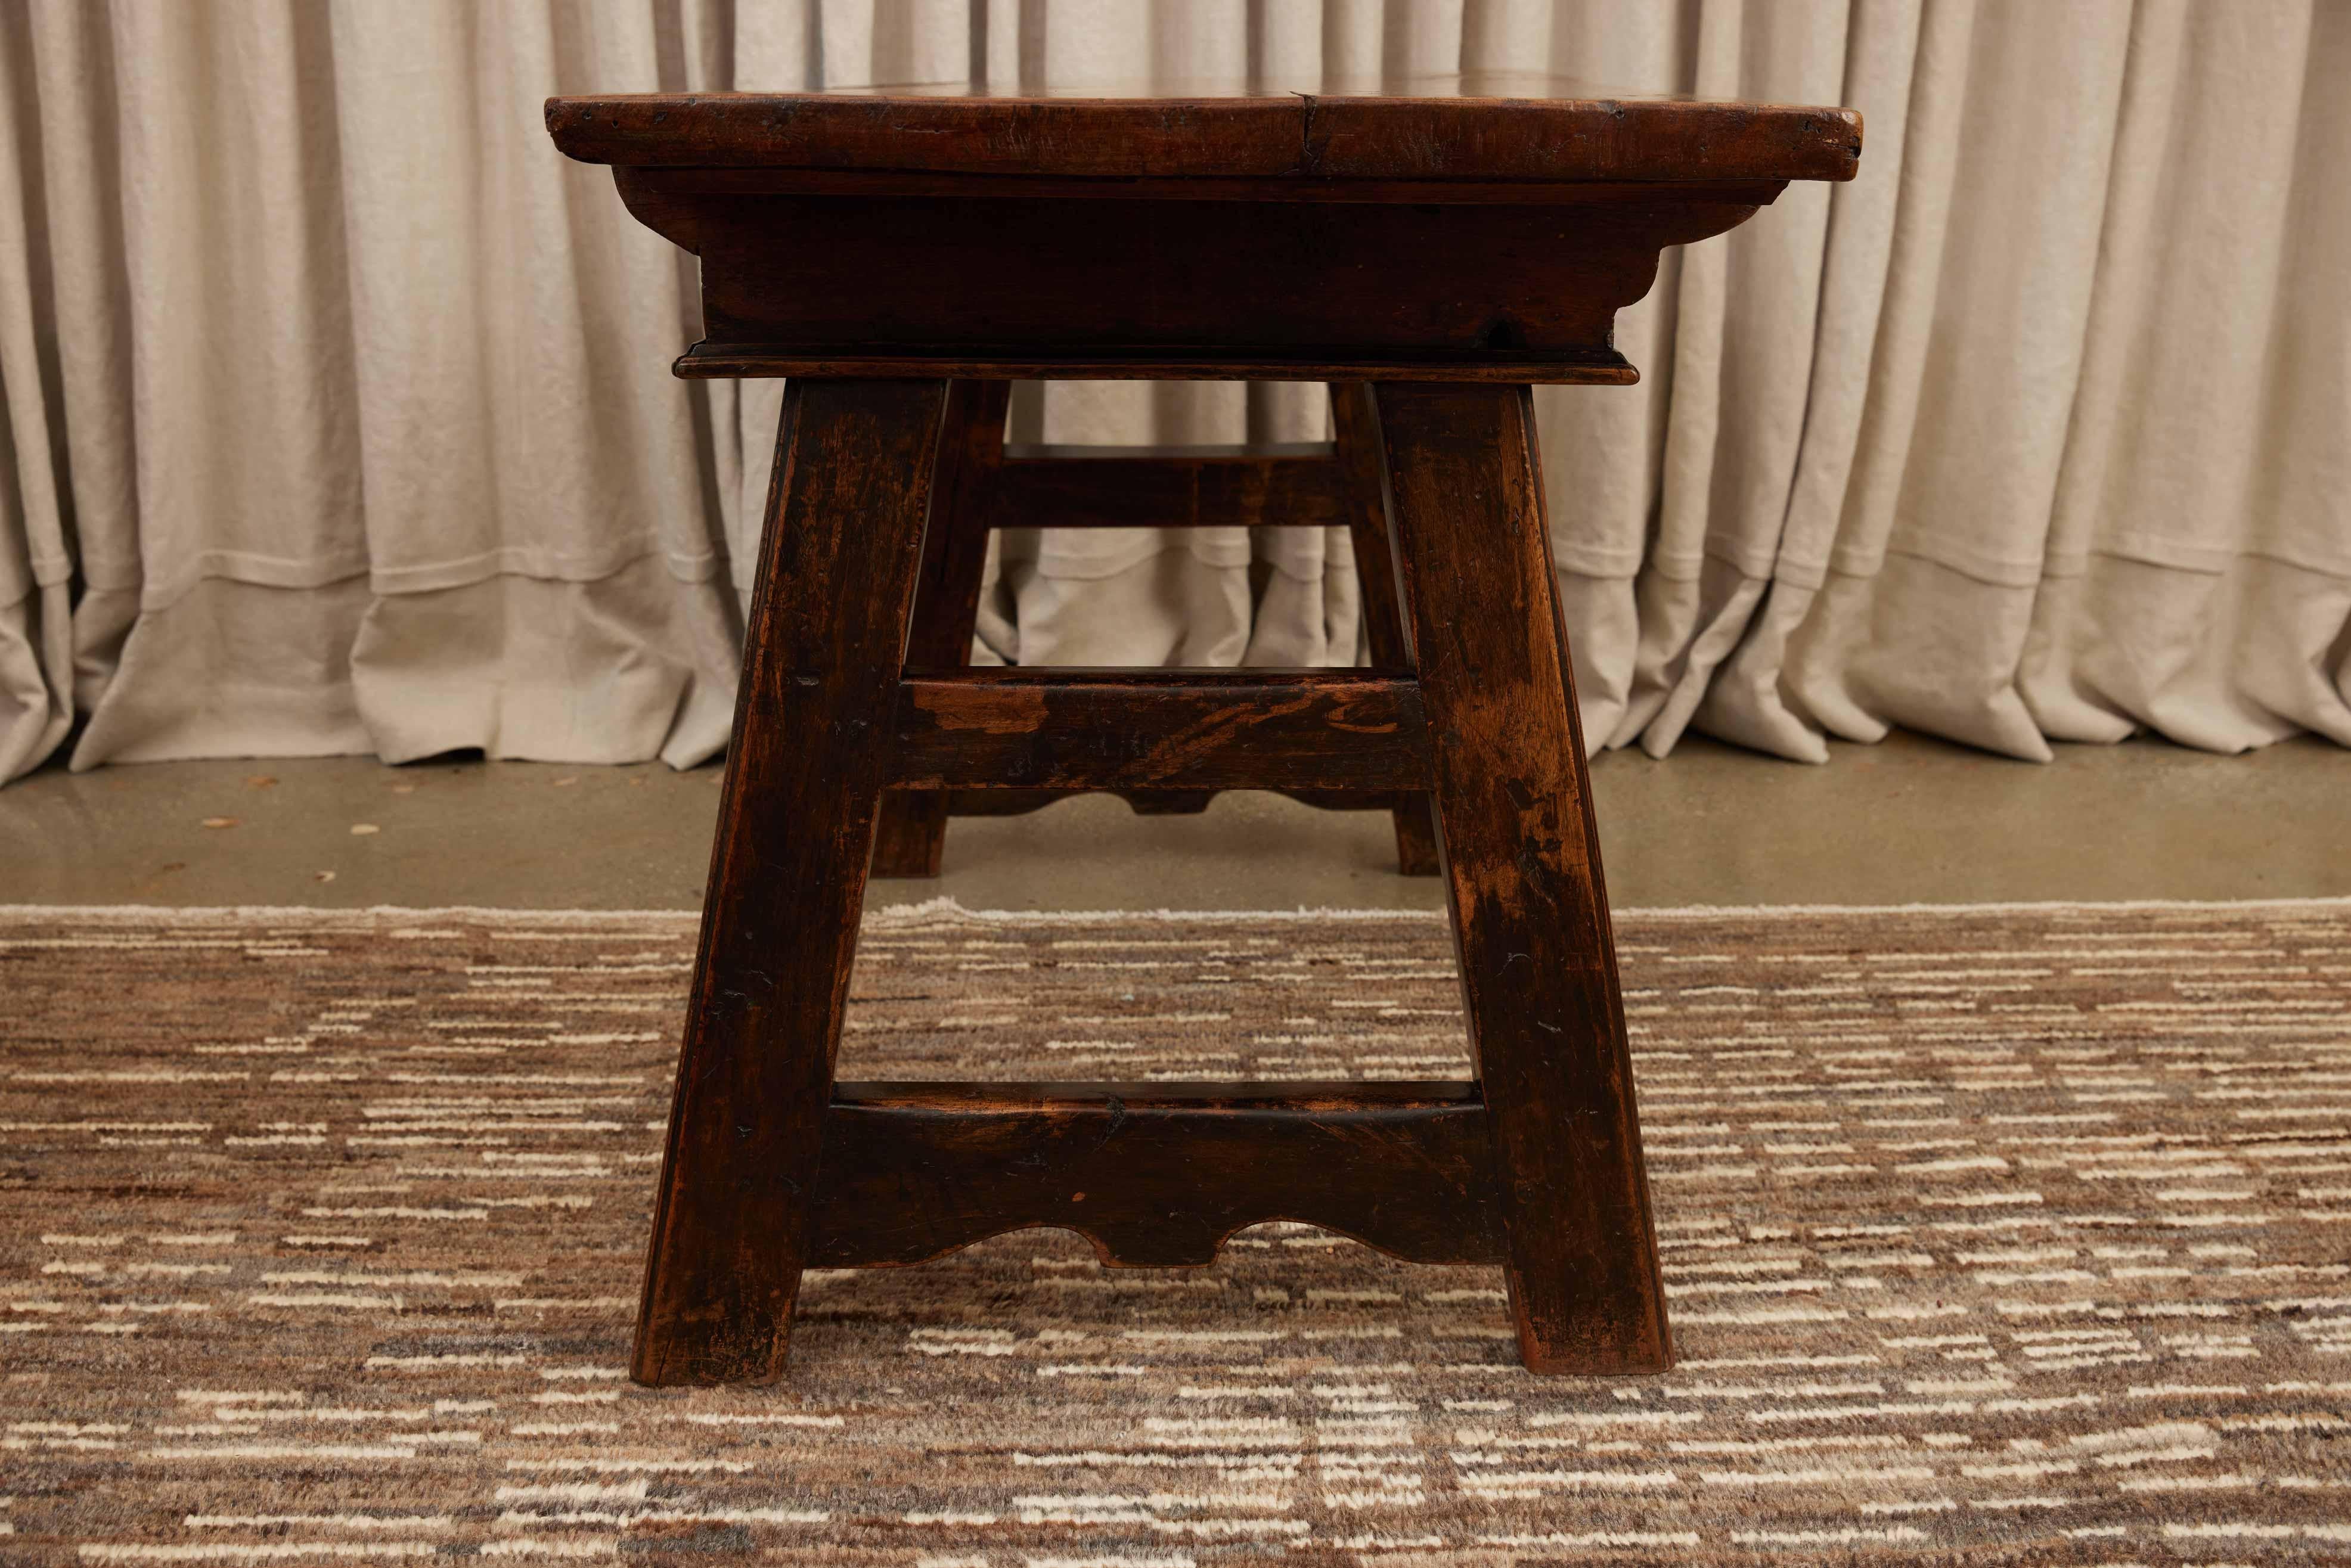 18th C. Spanish Beautifully Rustic Carved-Wood Trestle-Leg Table with Drawers For Sale 2